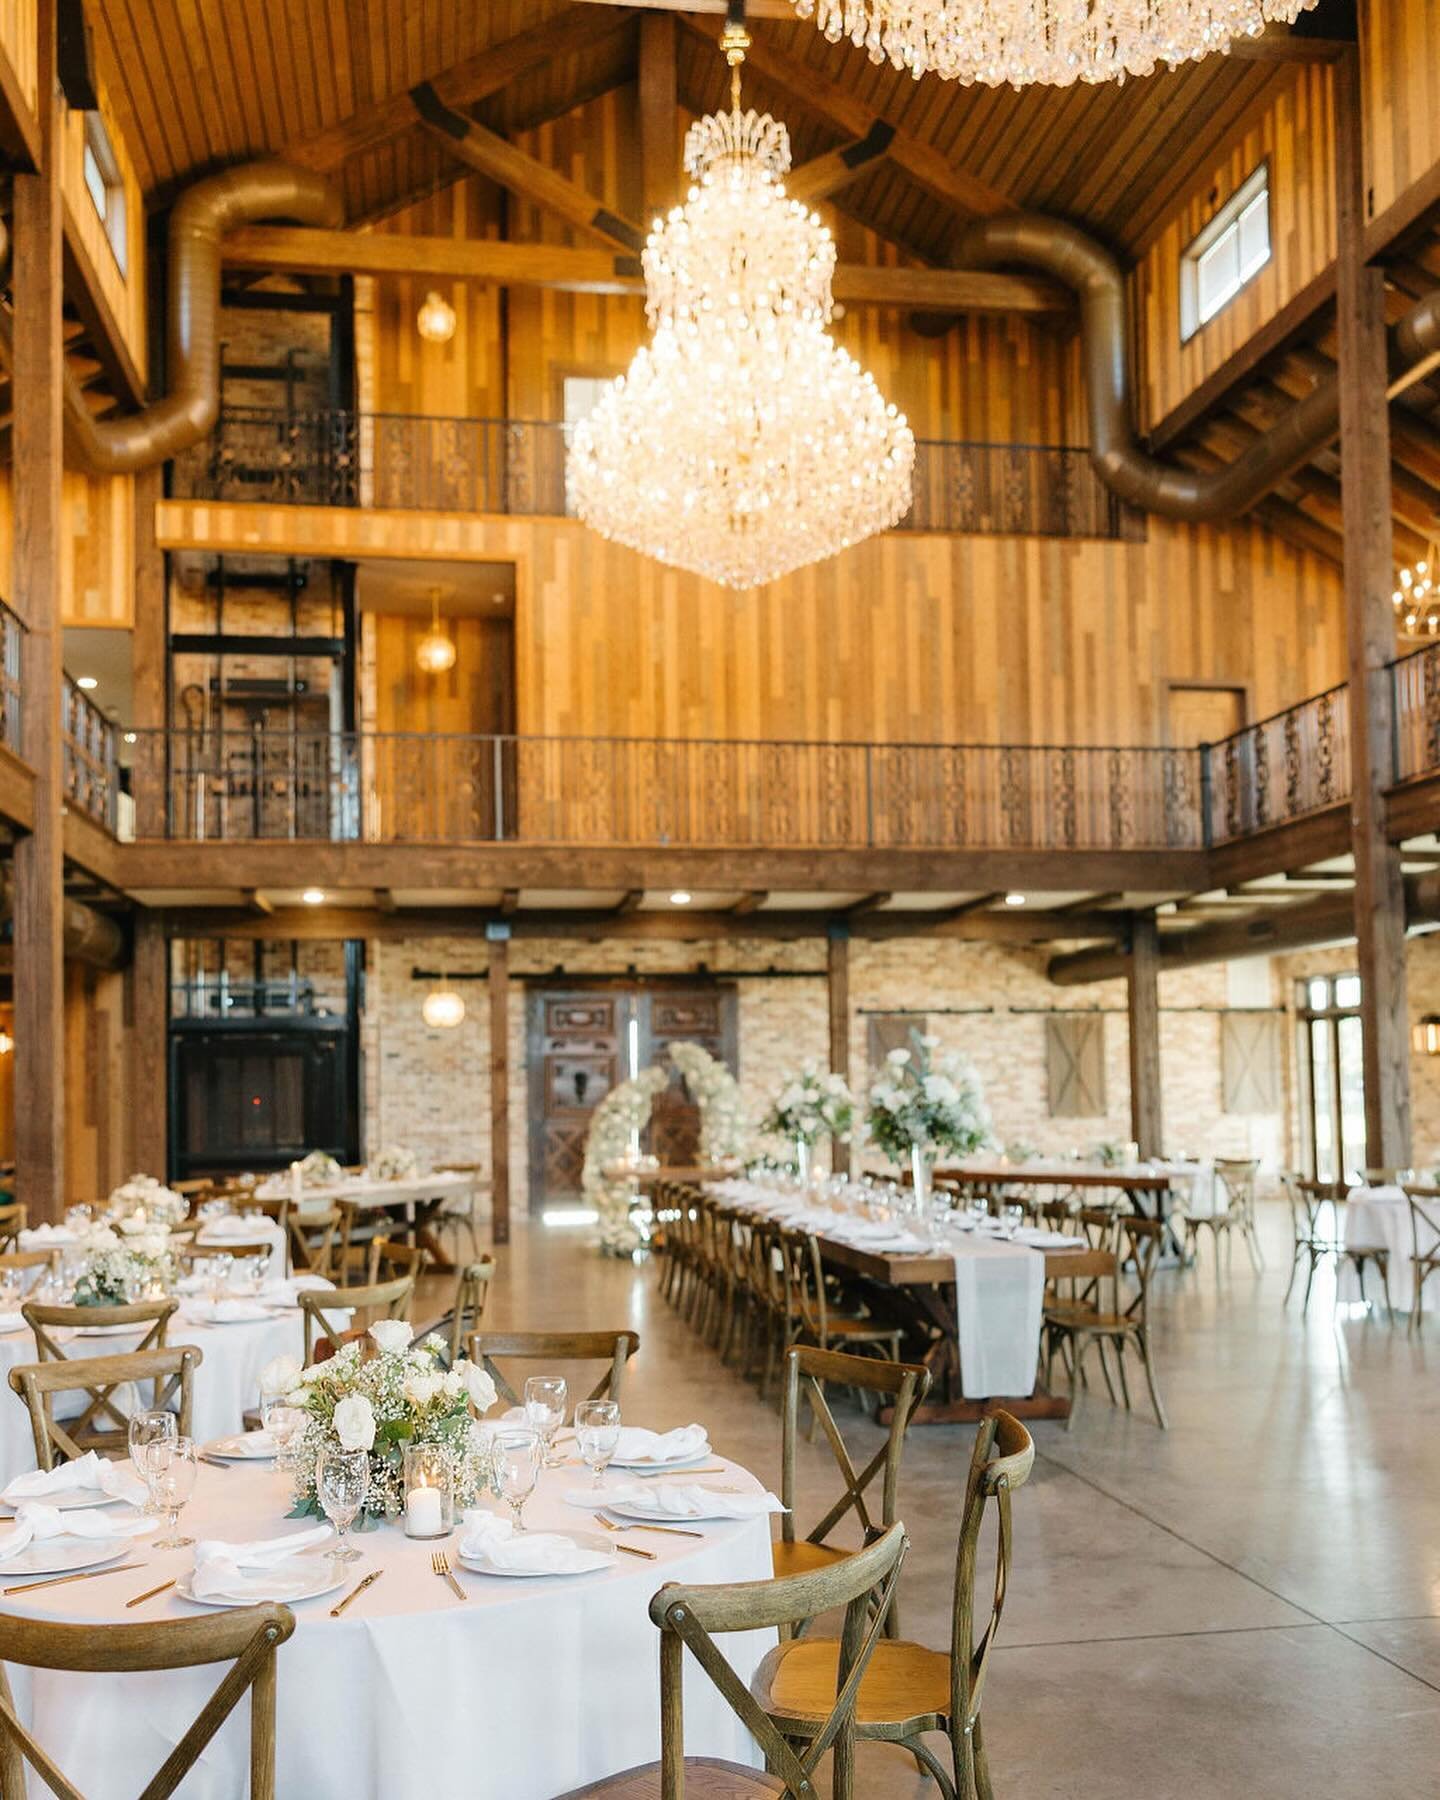 Beautiful tables out at @theweinbergatwixon. The warm, rich tones mixed with the classic color scheme are 😘🤌🏼chef&rsquo;s kiss

#dallaswedding #fortworthwedding #texaswedding #texasweddingplanner #dallasweddingplanner #fortworthweddingplanner #wed